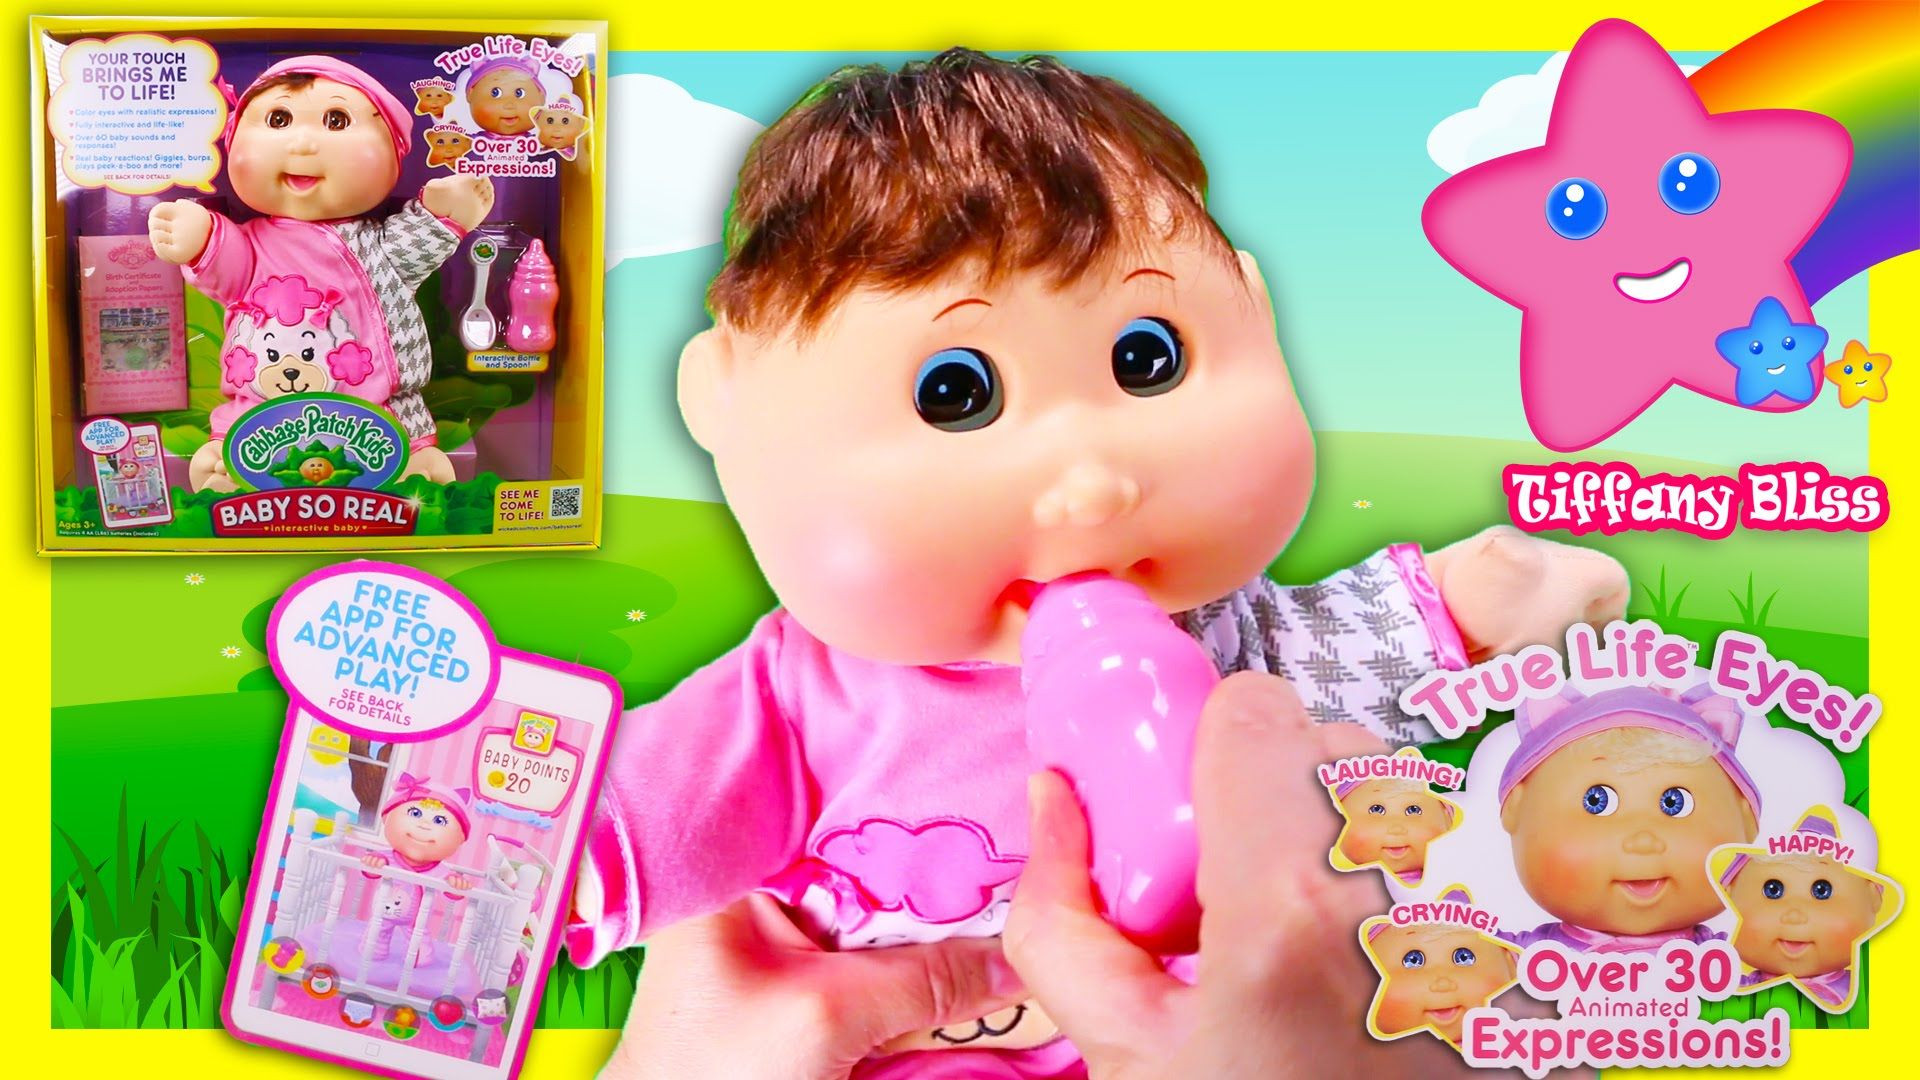 Cabbage Patch Baby So Real Reviews
 Cabbage Patch Kids Baby So Real Interactive Doll NEW 2016